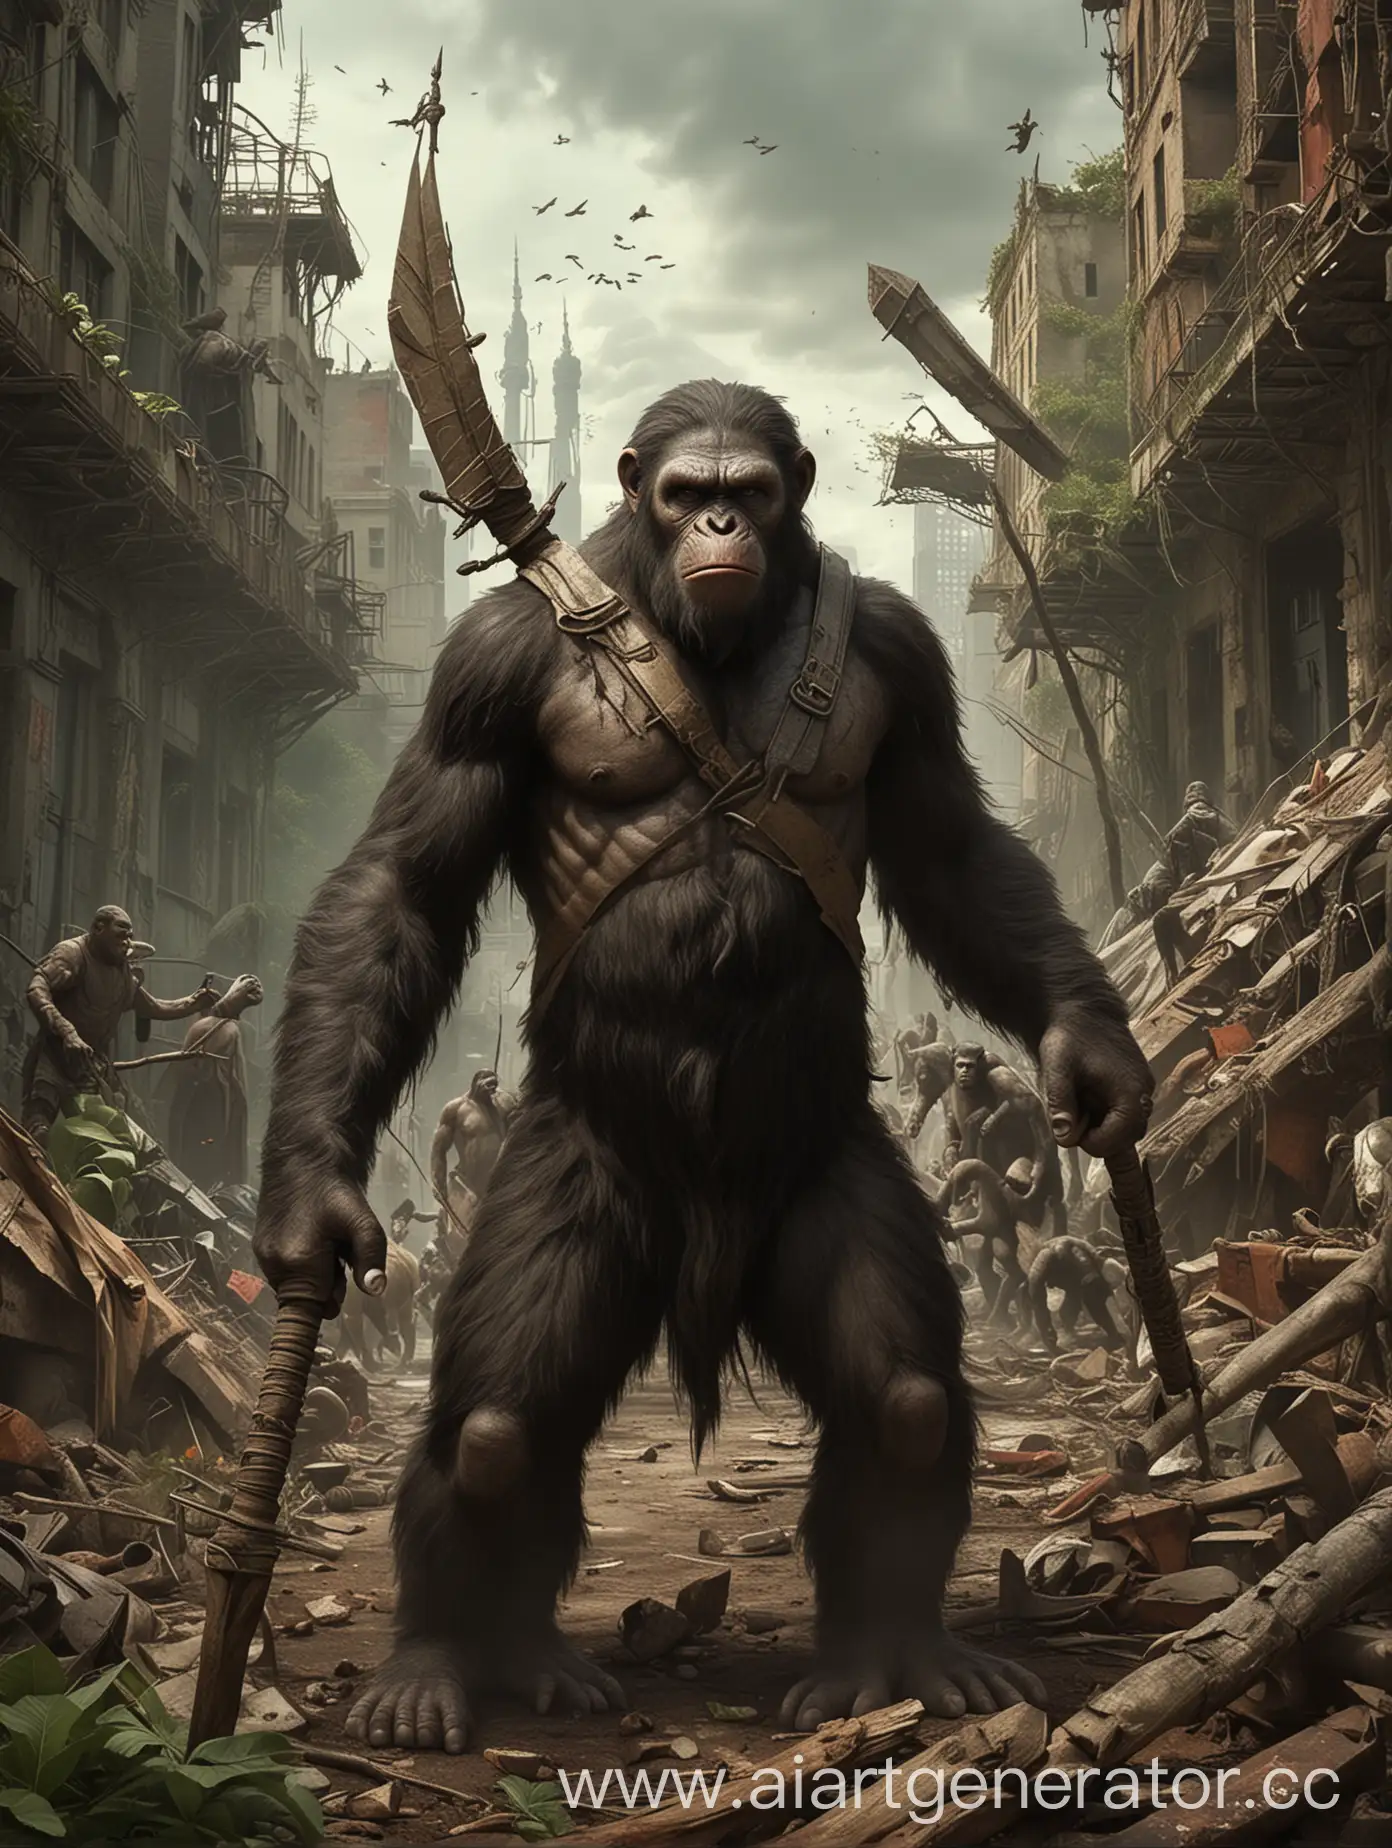 Dynamic-Cartoon-Movie-Poster-Planet-of-the-Apes-Series